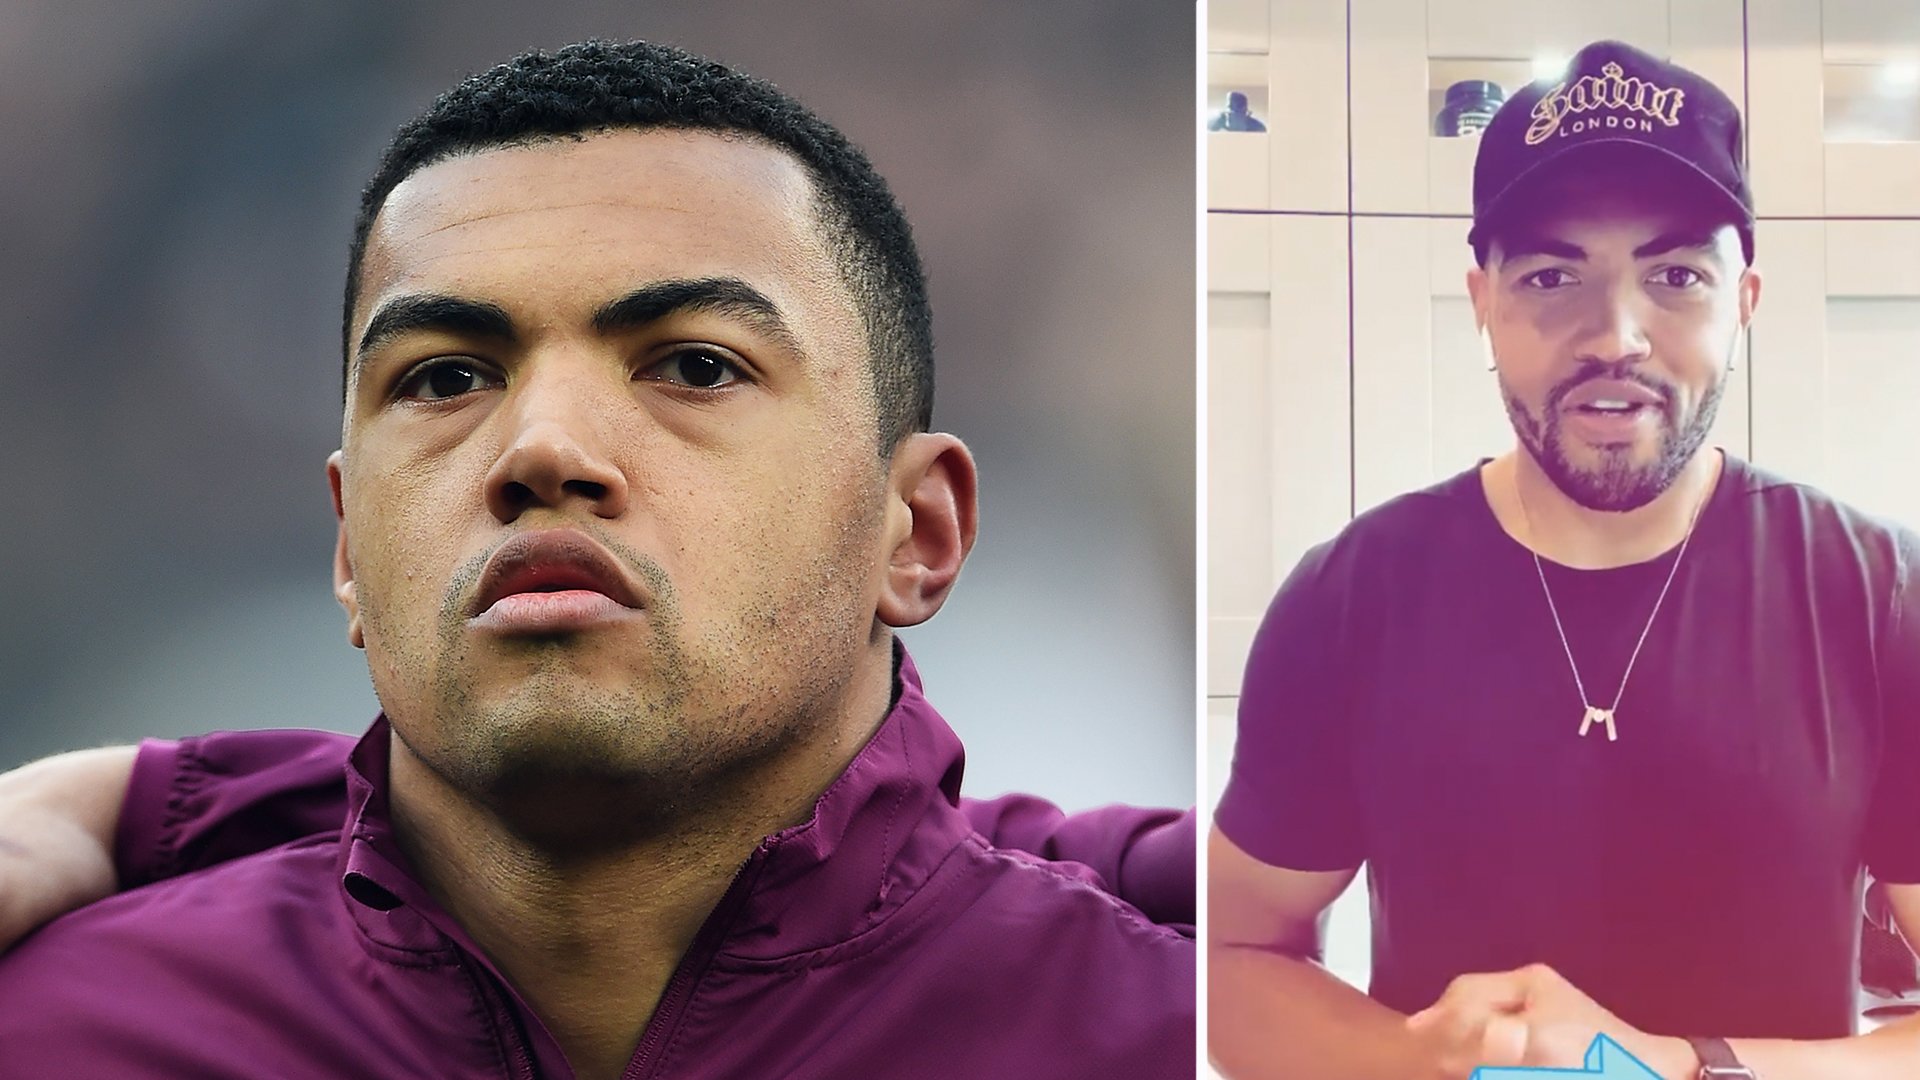 The rugby player Eddie Jones branded as 'grossly overweight' posts stunning body transformation online